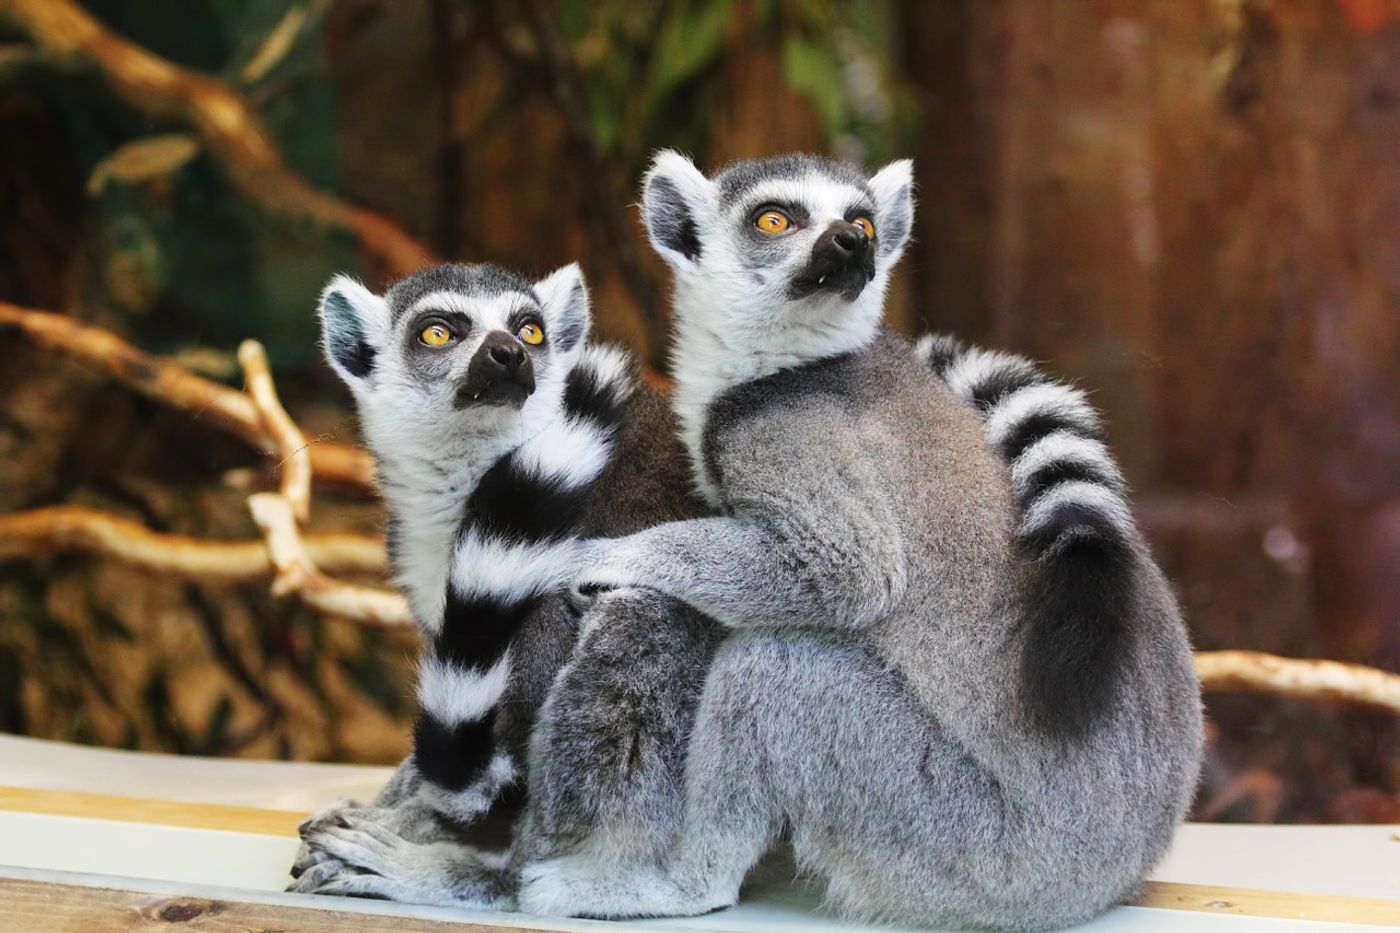 Lemurs could go extinct if we don't do something about it.